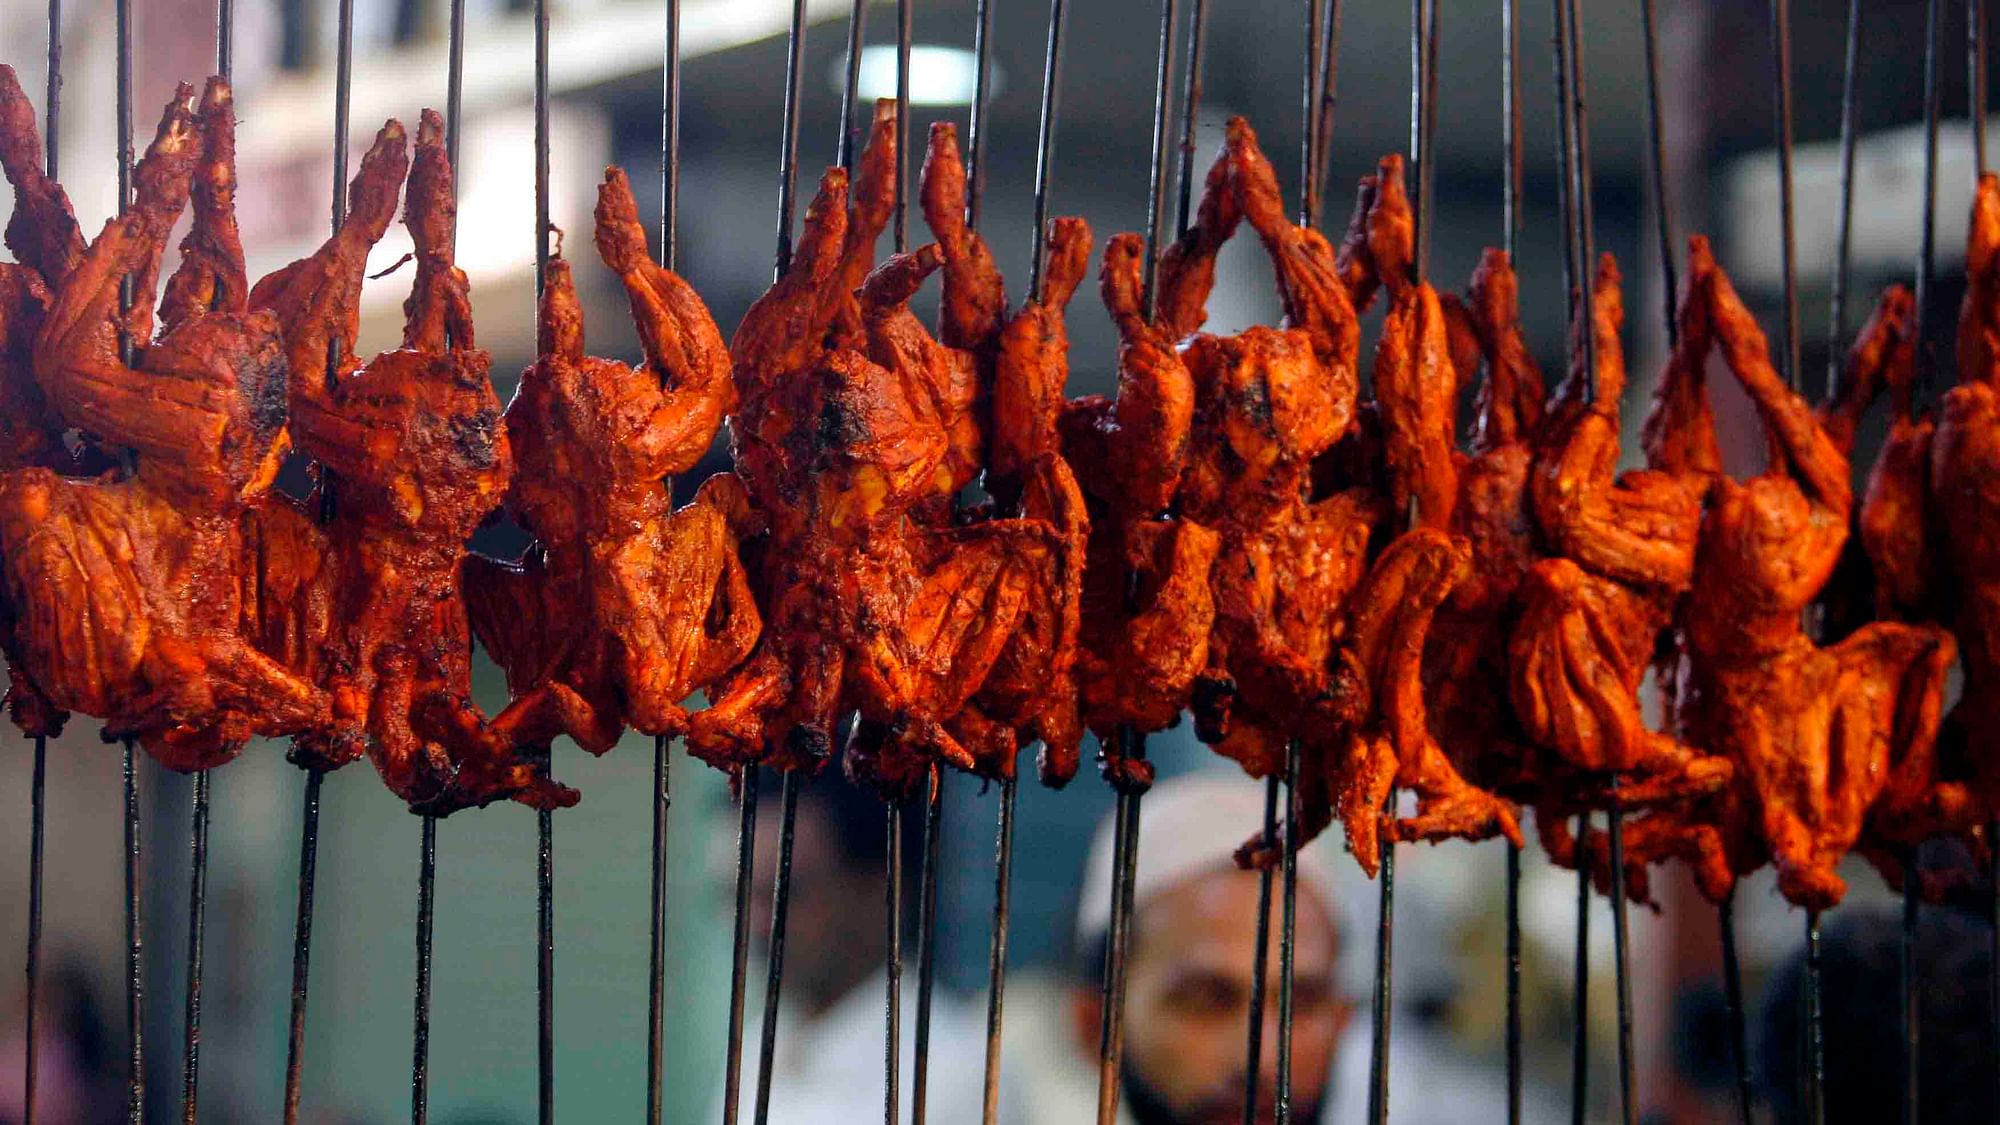 <div class="paragraphs"><p>Skewered chicken being sold at an eatery in Mumbai  </p></div>